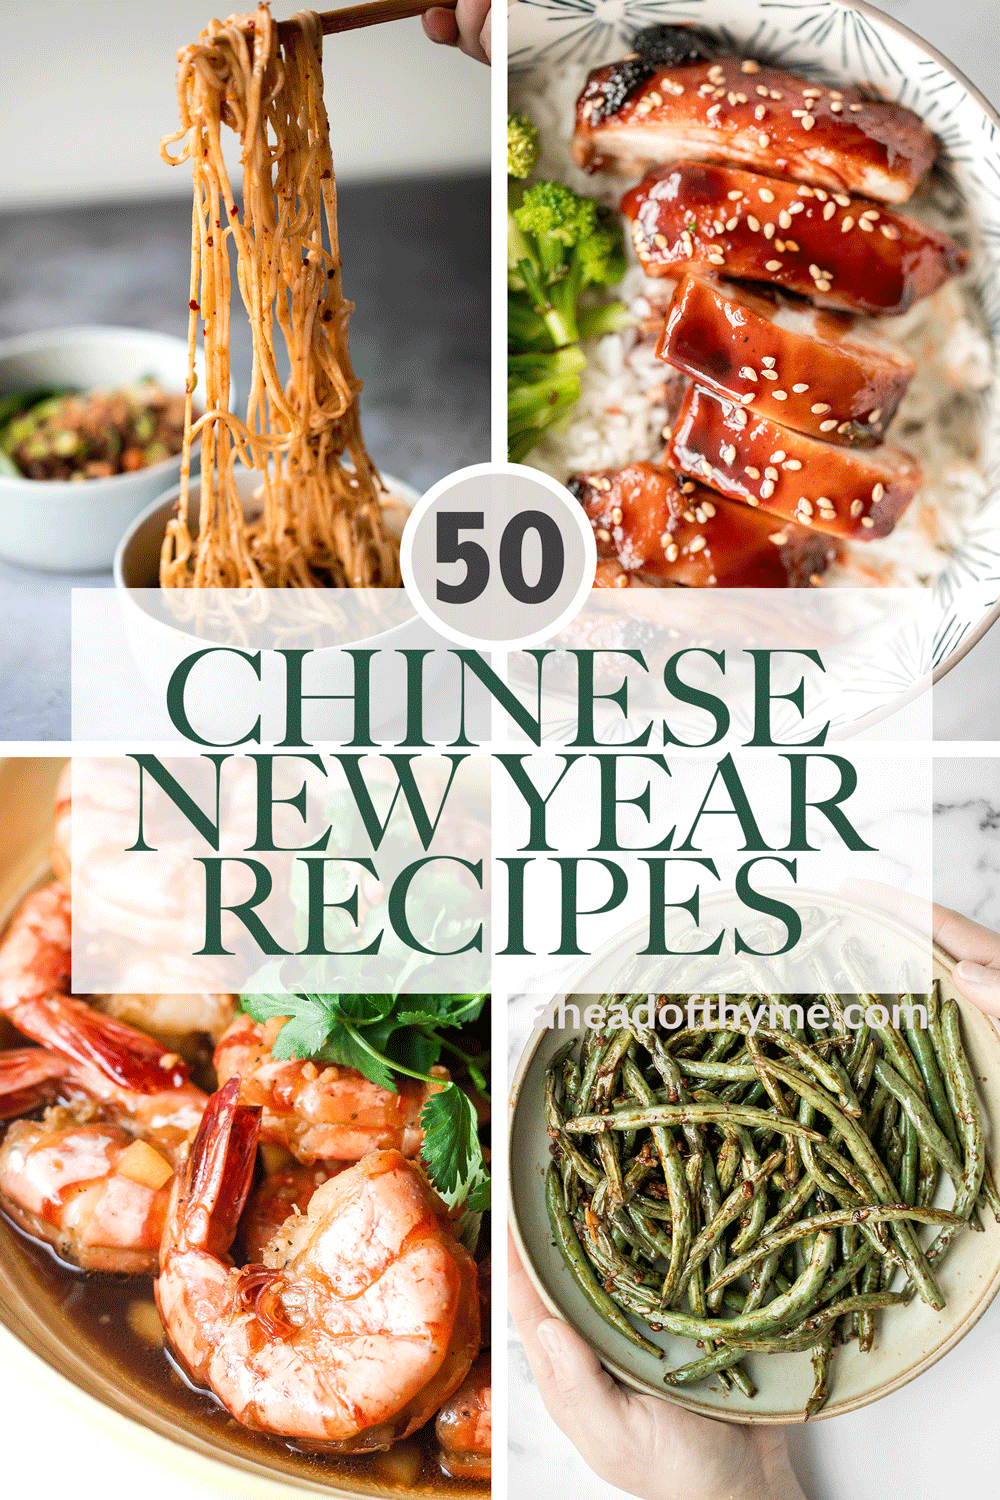 50 Chinese New Year Recipes